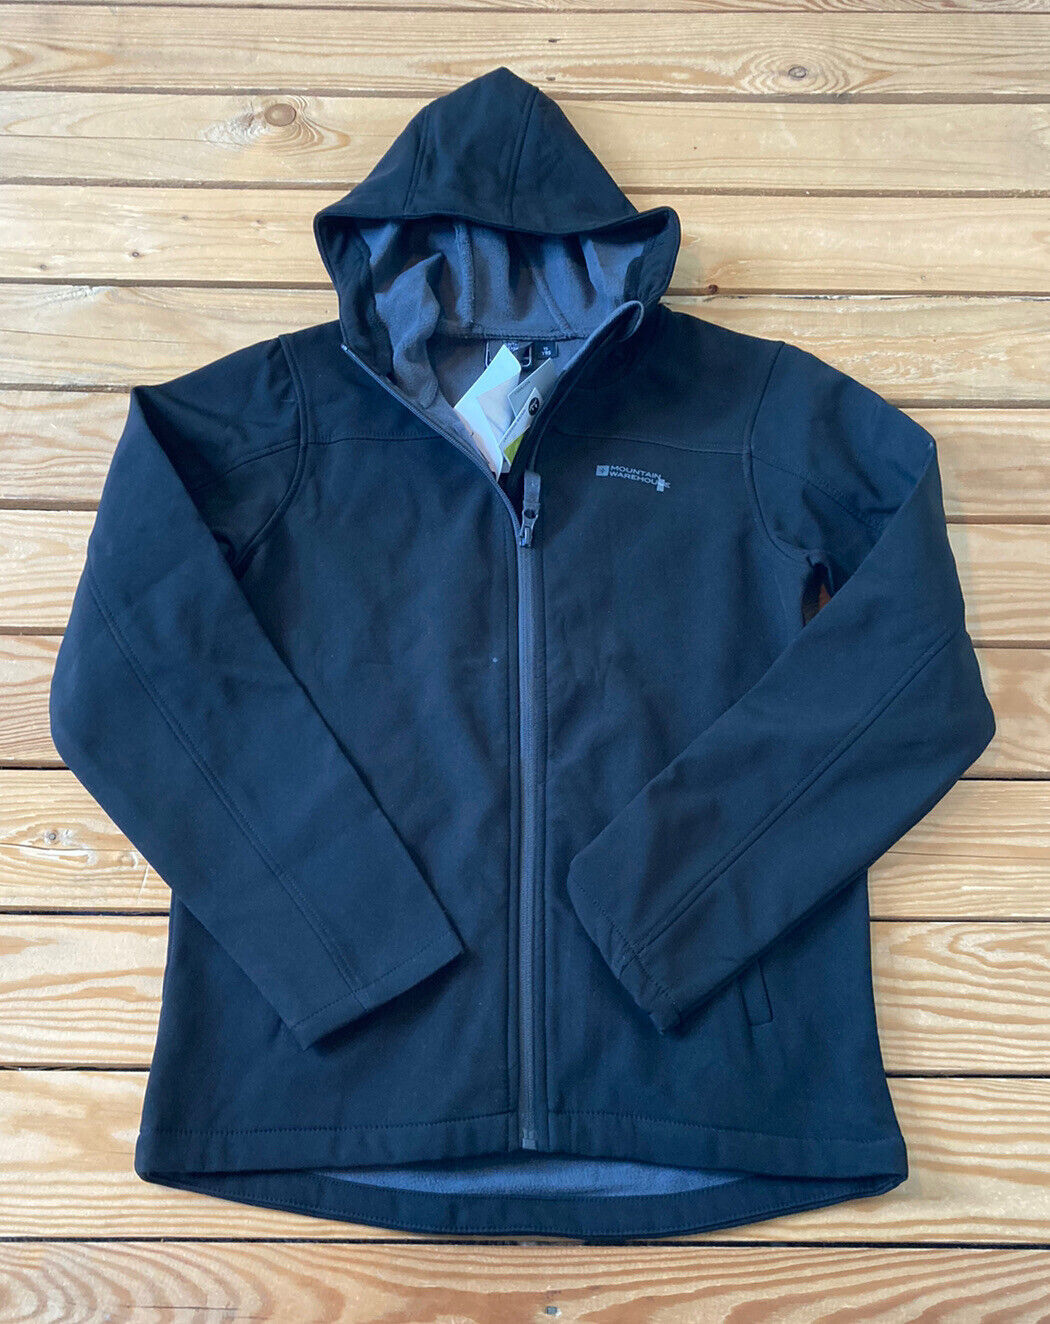 Primary image for mountain warehouse NWT $49.99 youth full zip Hooded jacket sz 13 years Black C9